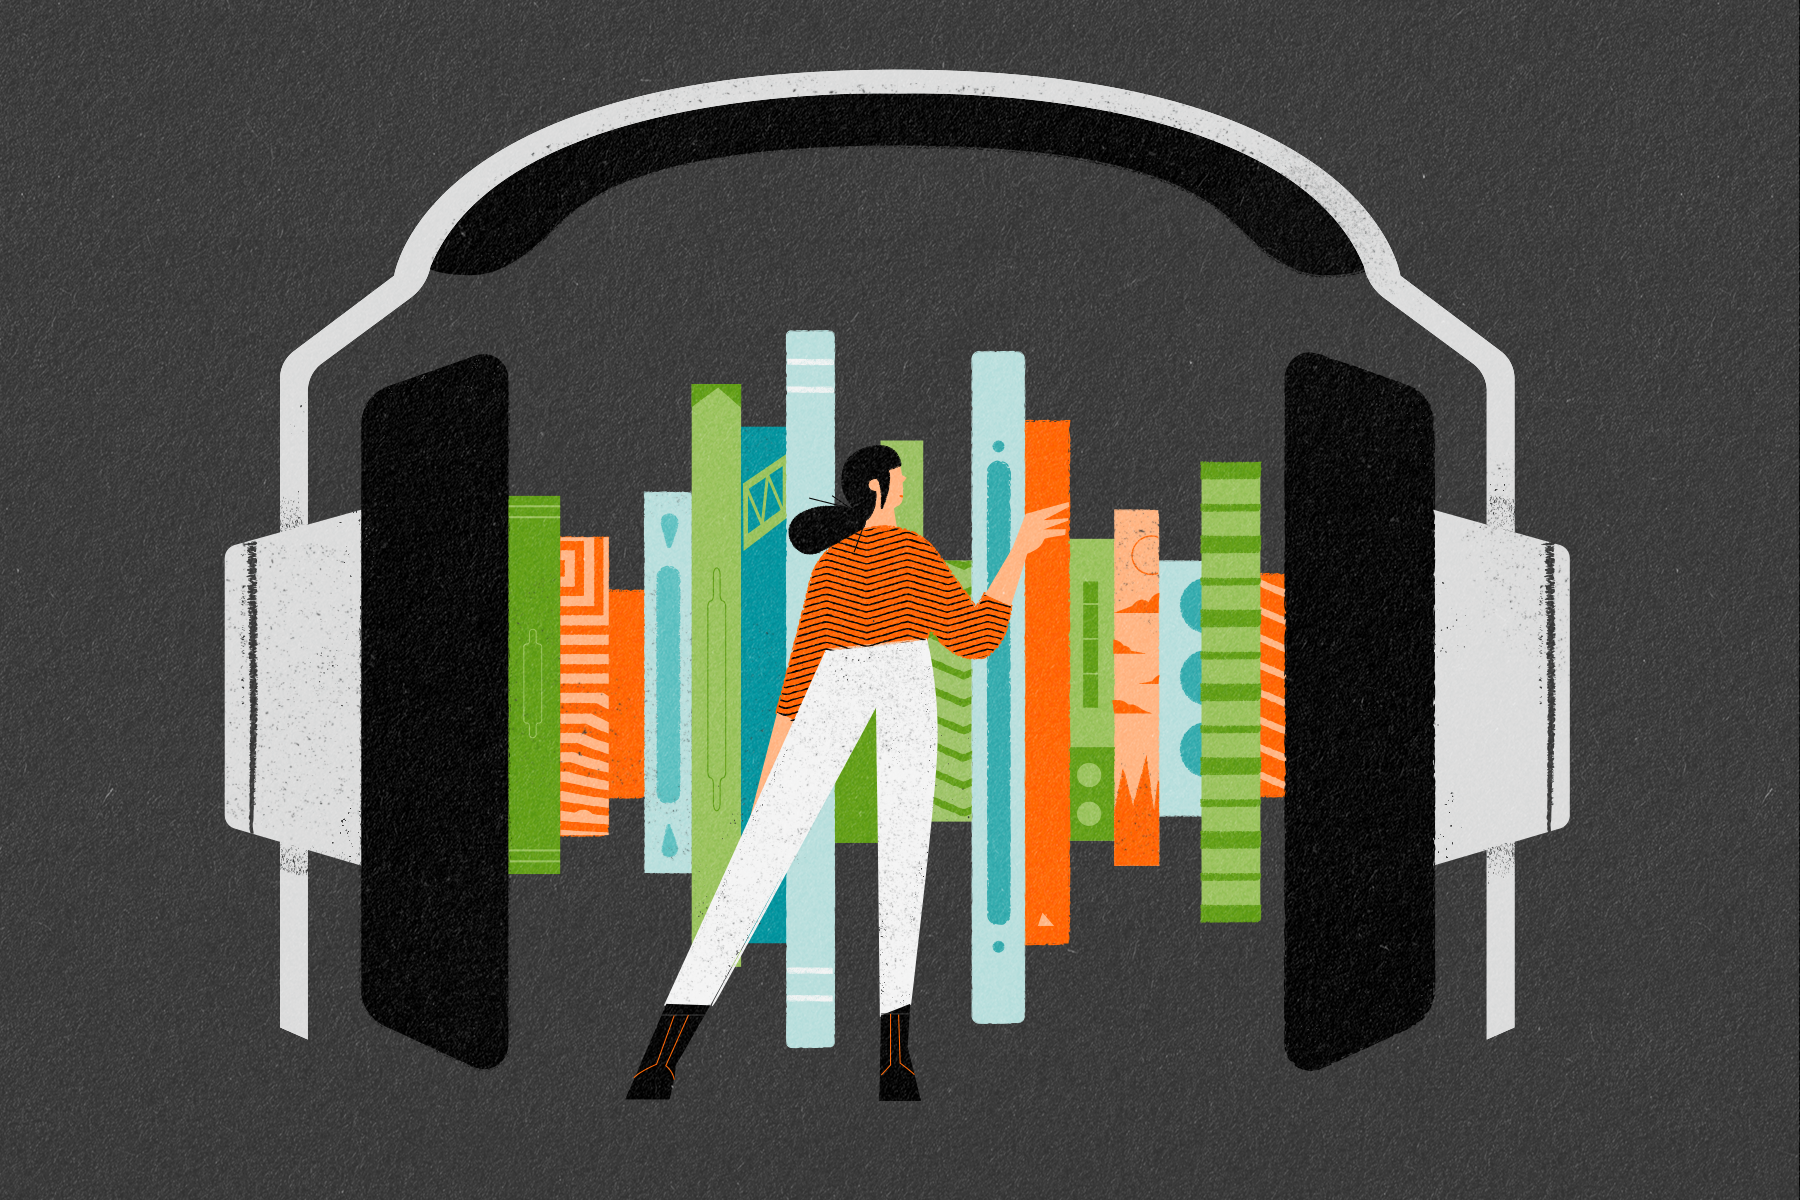 Illustration of someone choosing a book from within a giant pair of headphones